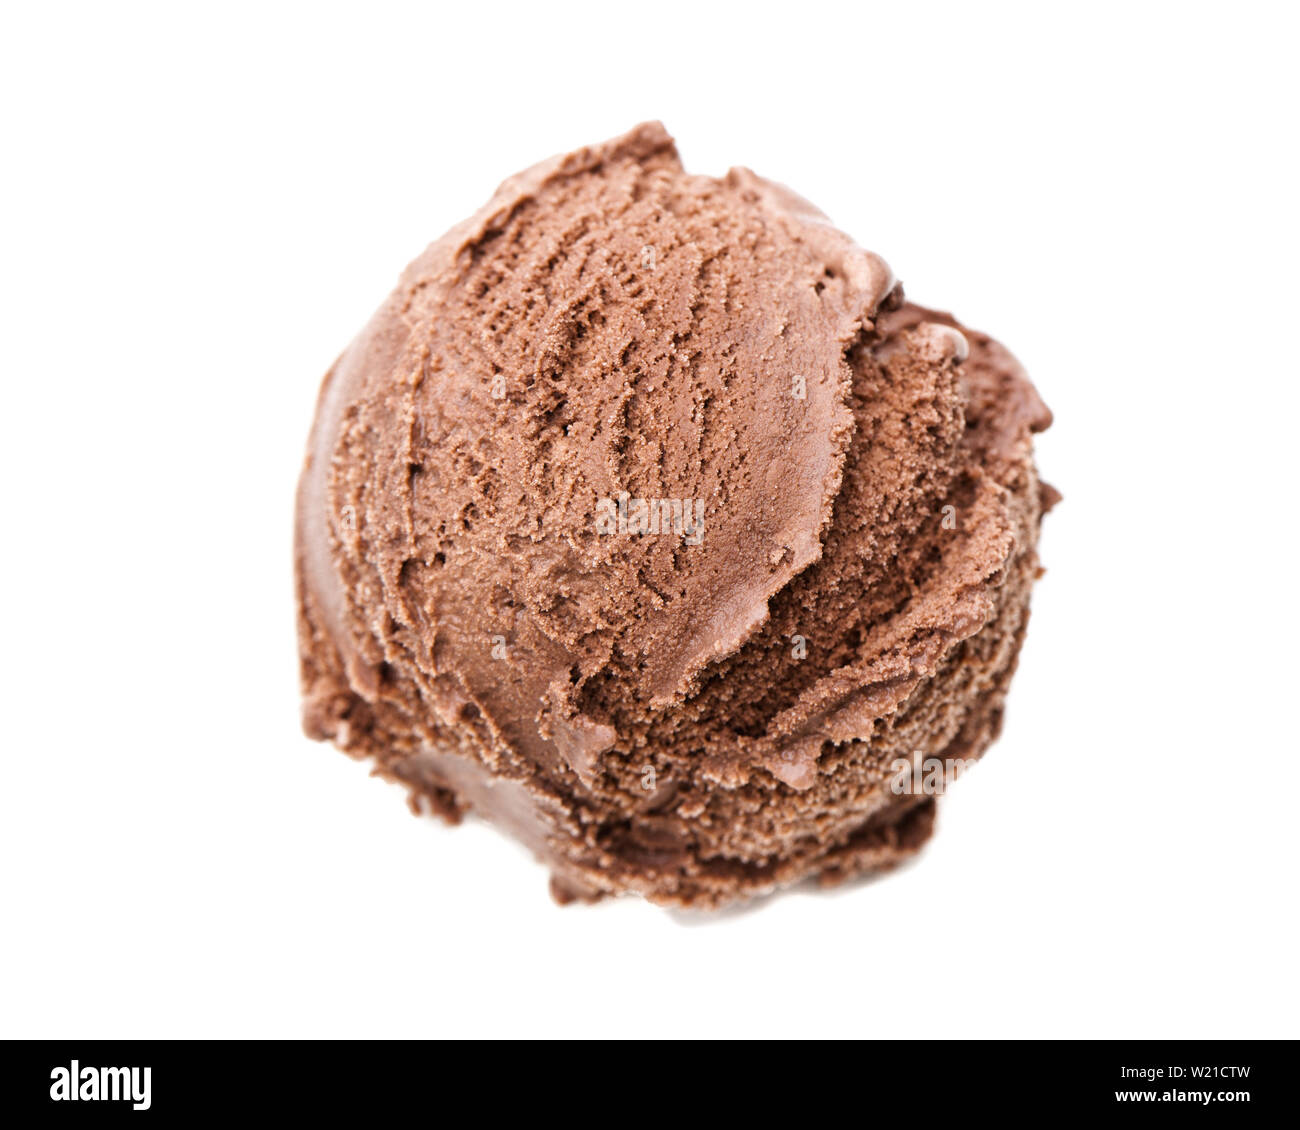 A scoop of chocolate ice cream from bird's eye view isolated on white background Stock Photo